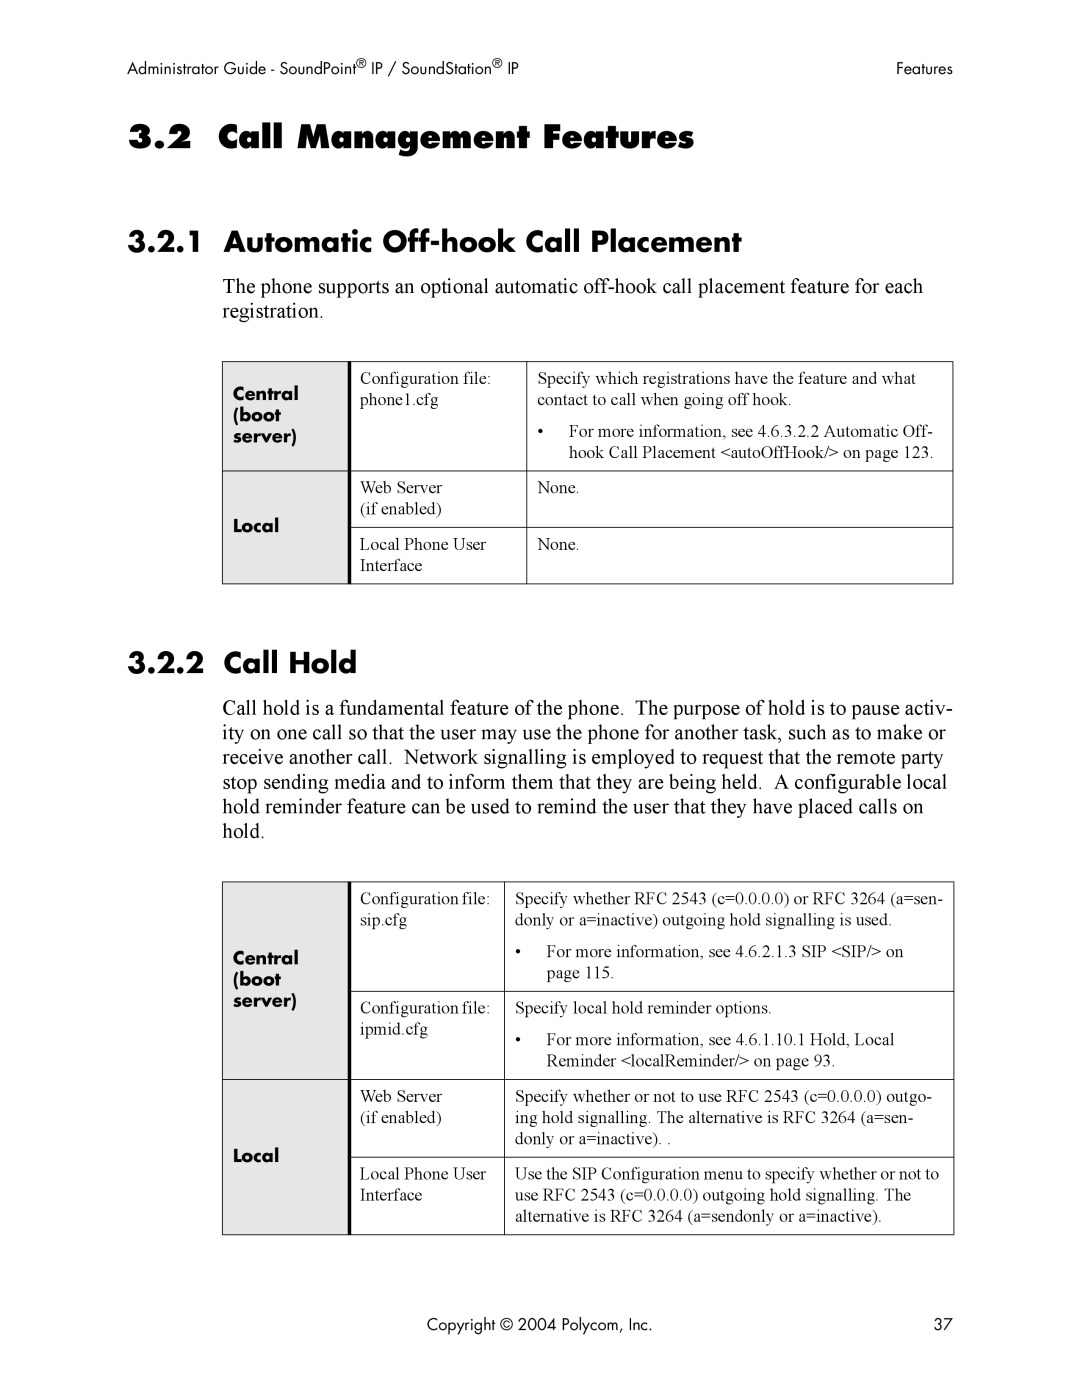 Polycom Version 1.4.x 17 manual Call Management Features, Automatic Off-hook Call Placement, Call Hold 